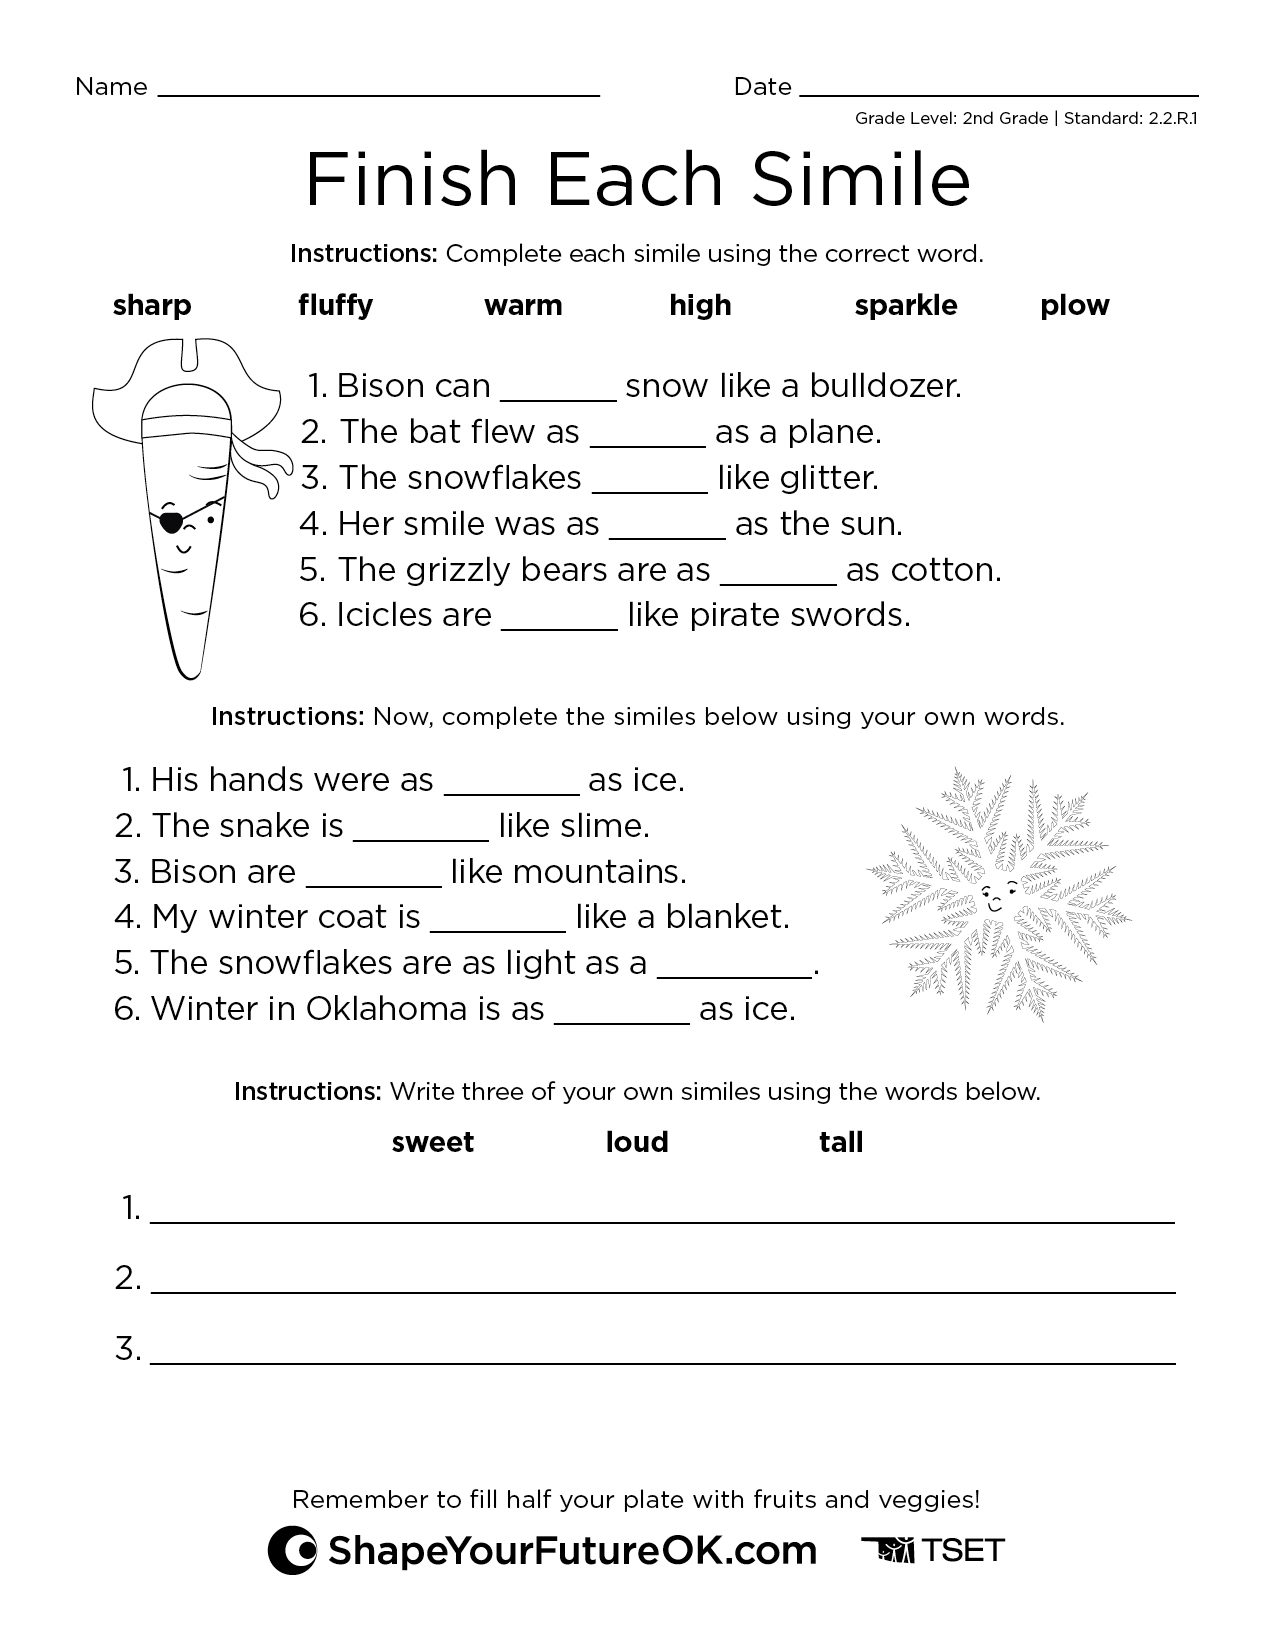 Finish Each Smile Download